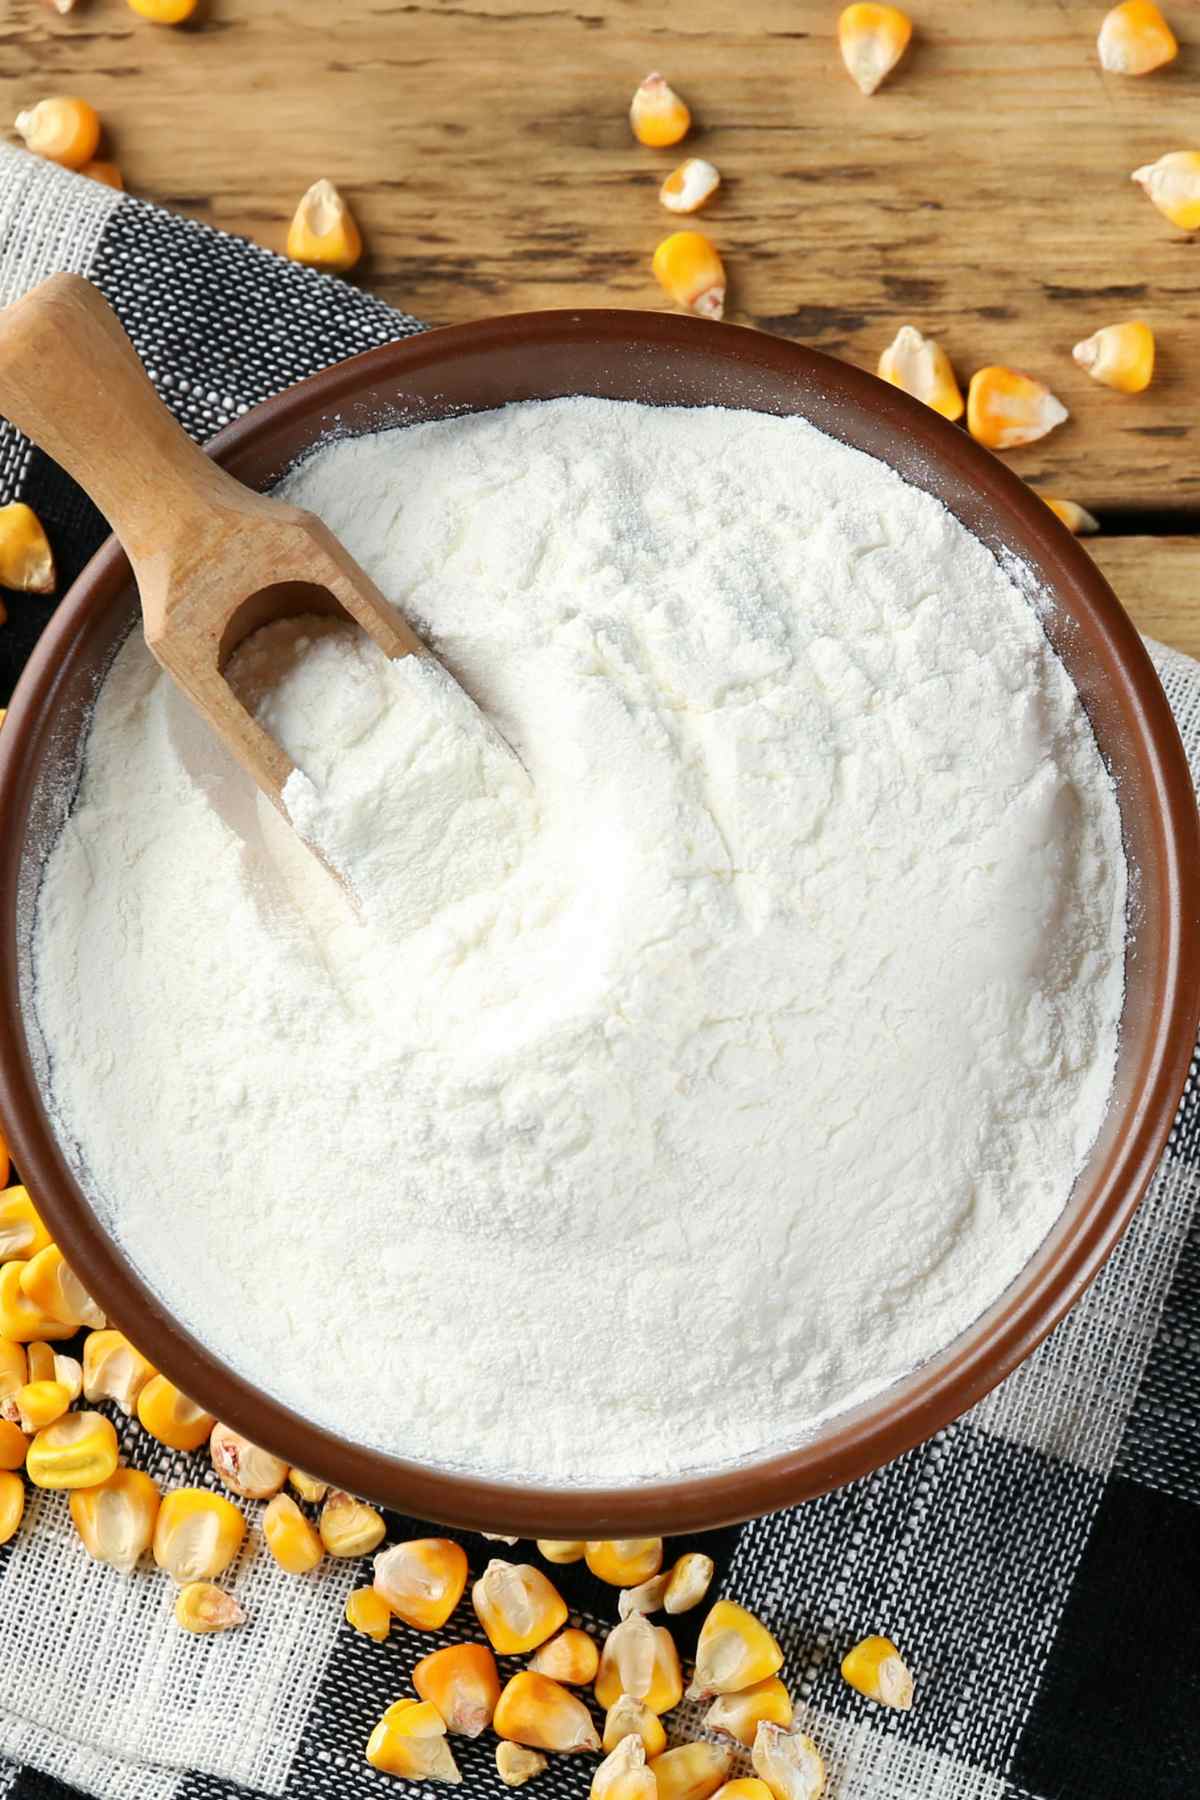 Wondering if you can have cornstarch on a keto diet? How about the net carbs in cornstarch? Keep reading to discover why cornstarch should be avoided on a low-carb diet, plus the best keto-friendly alternatives.